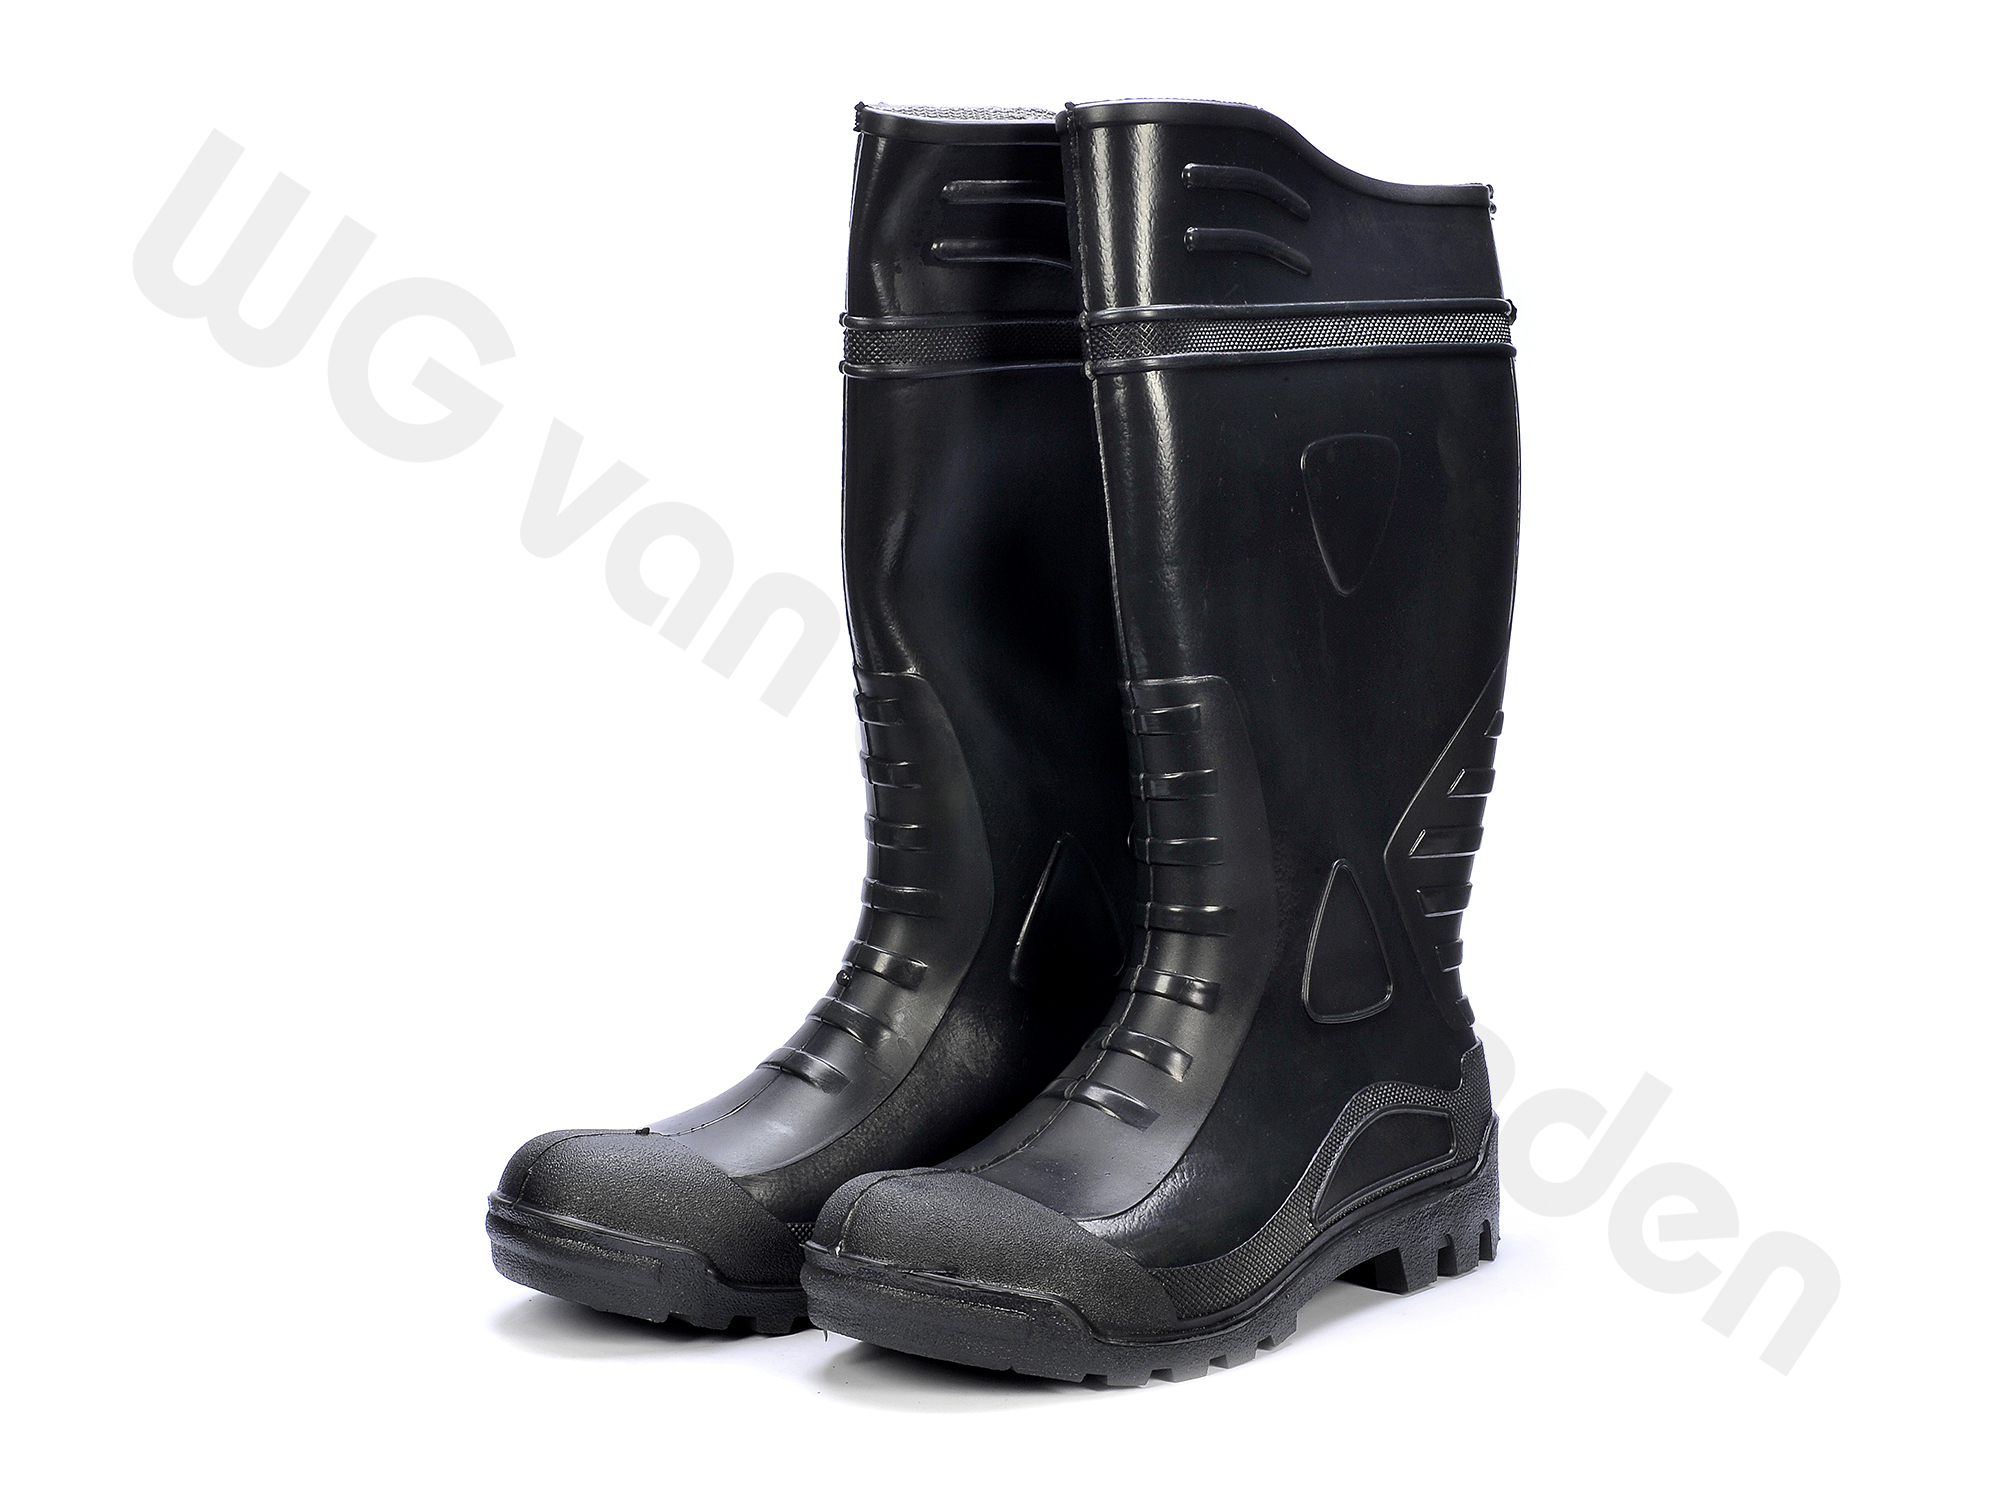 880201 BOOTS SAFETY S4 PVC WITH STEEL TOE SIZE 38/25CM CE